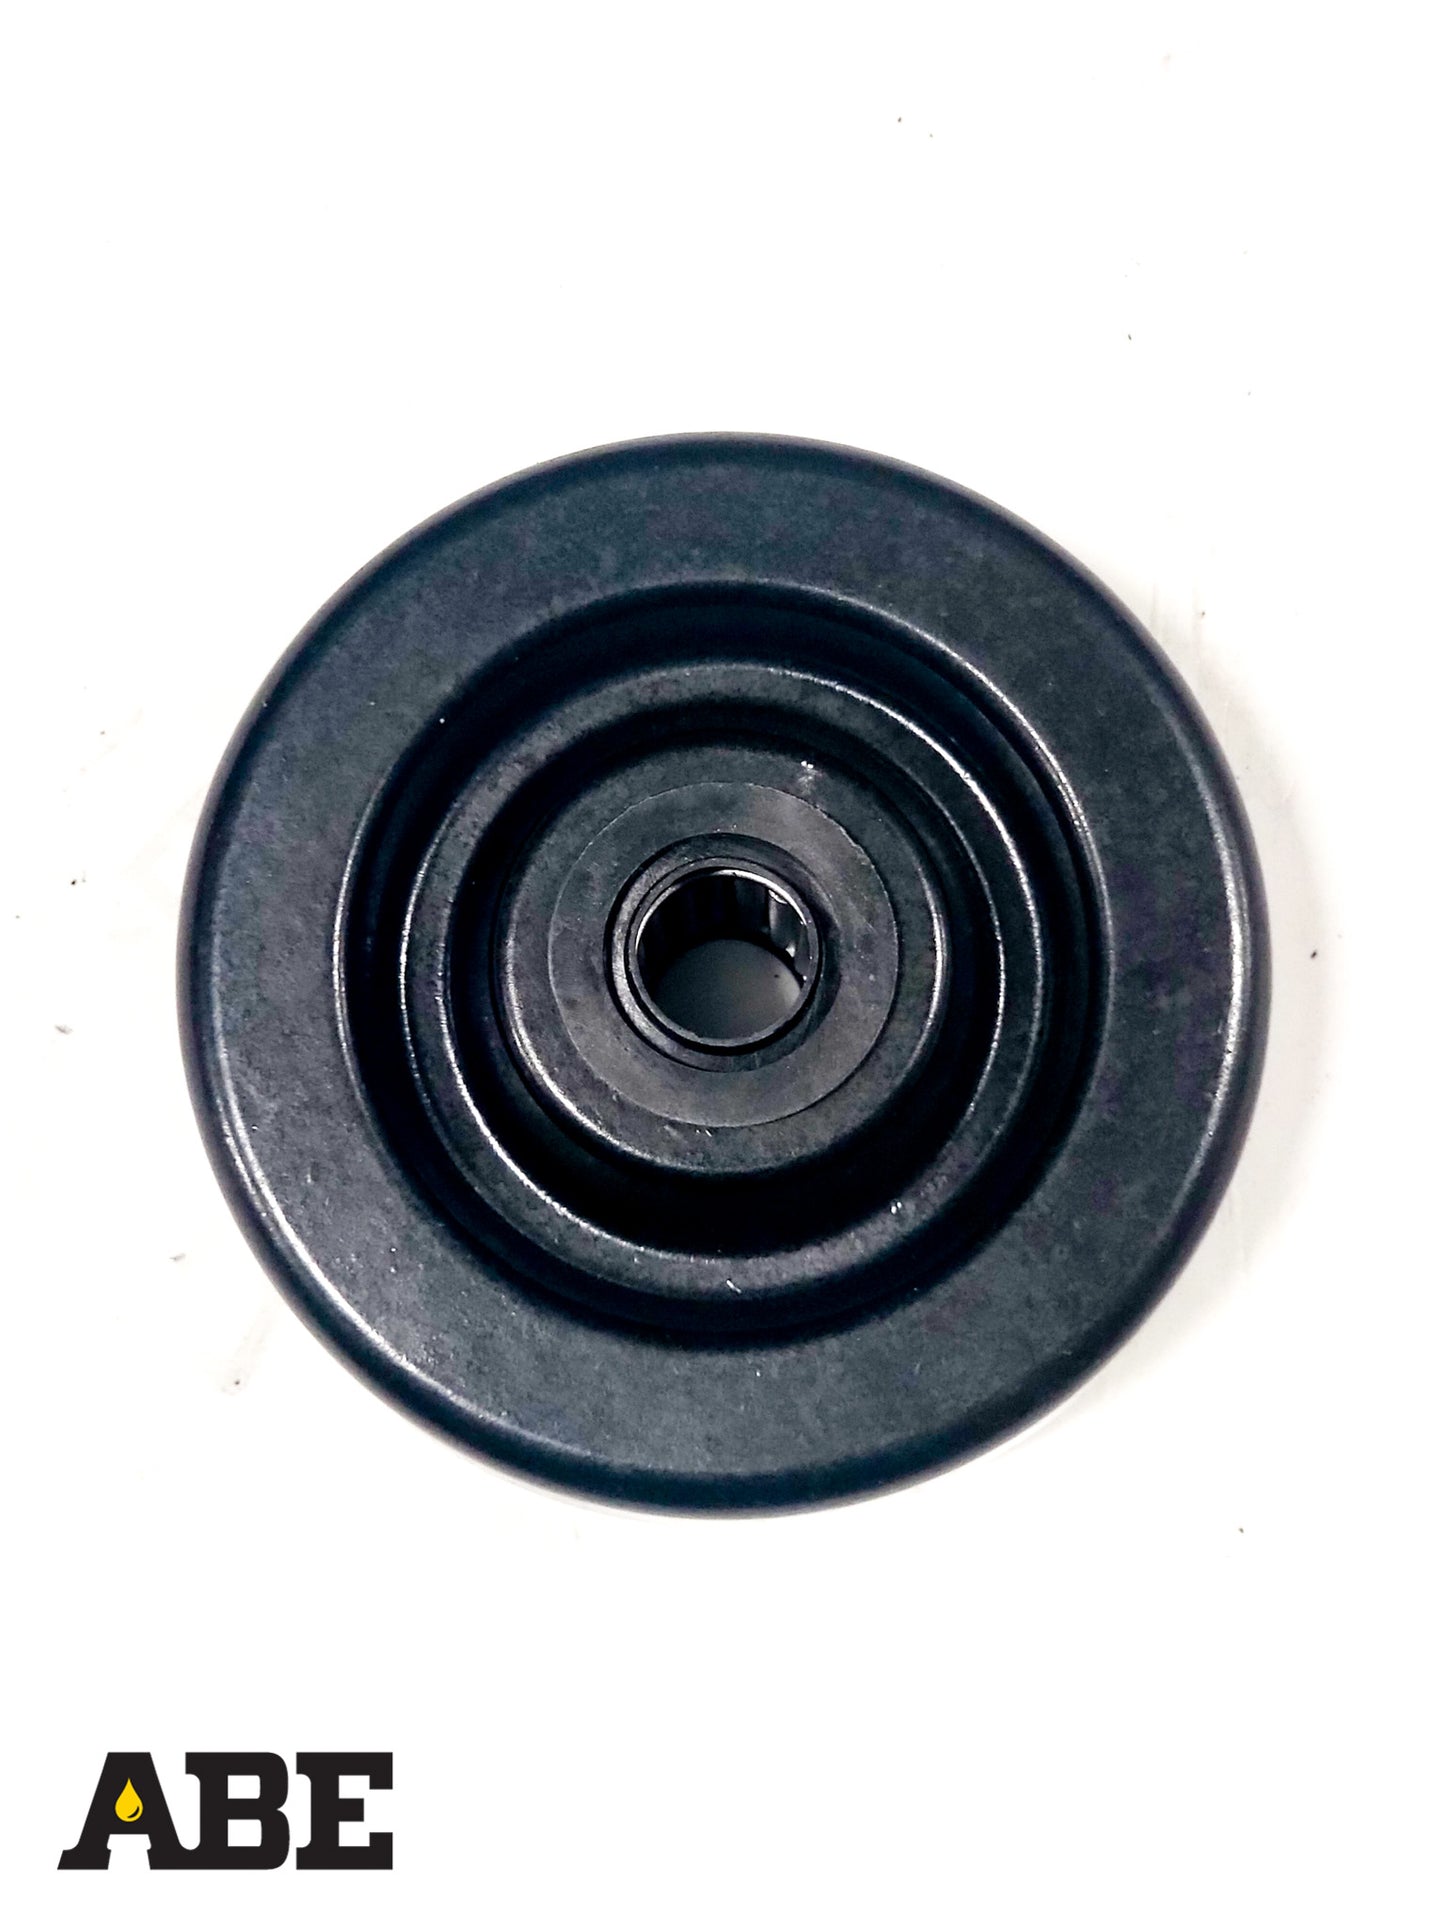 Caster Wheel with Bearing